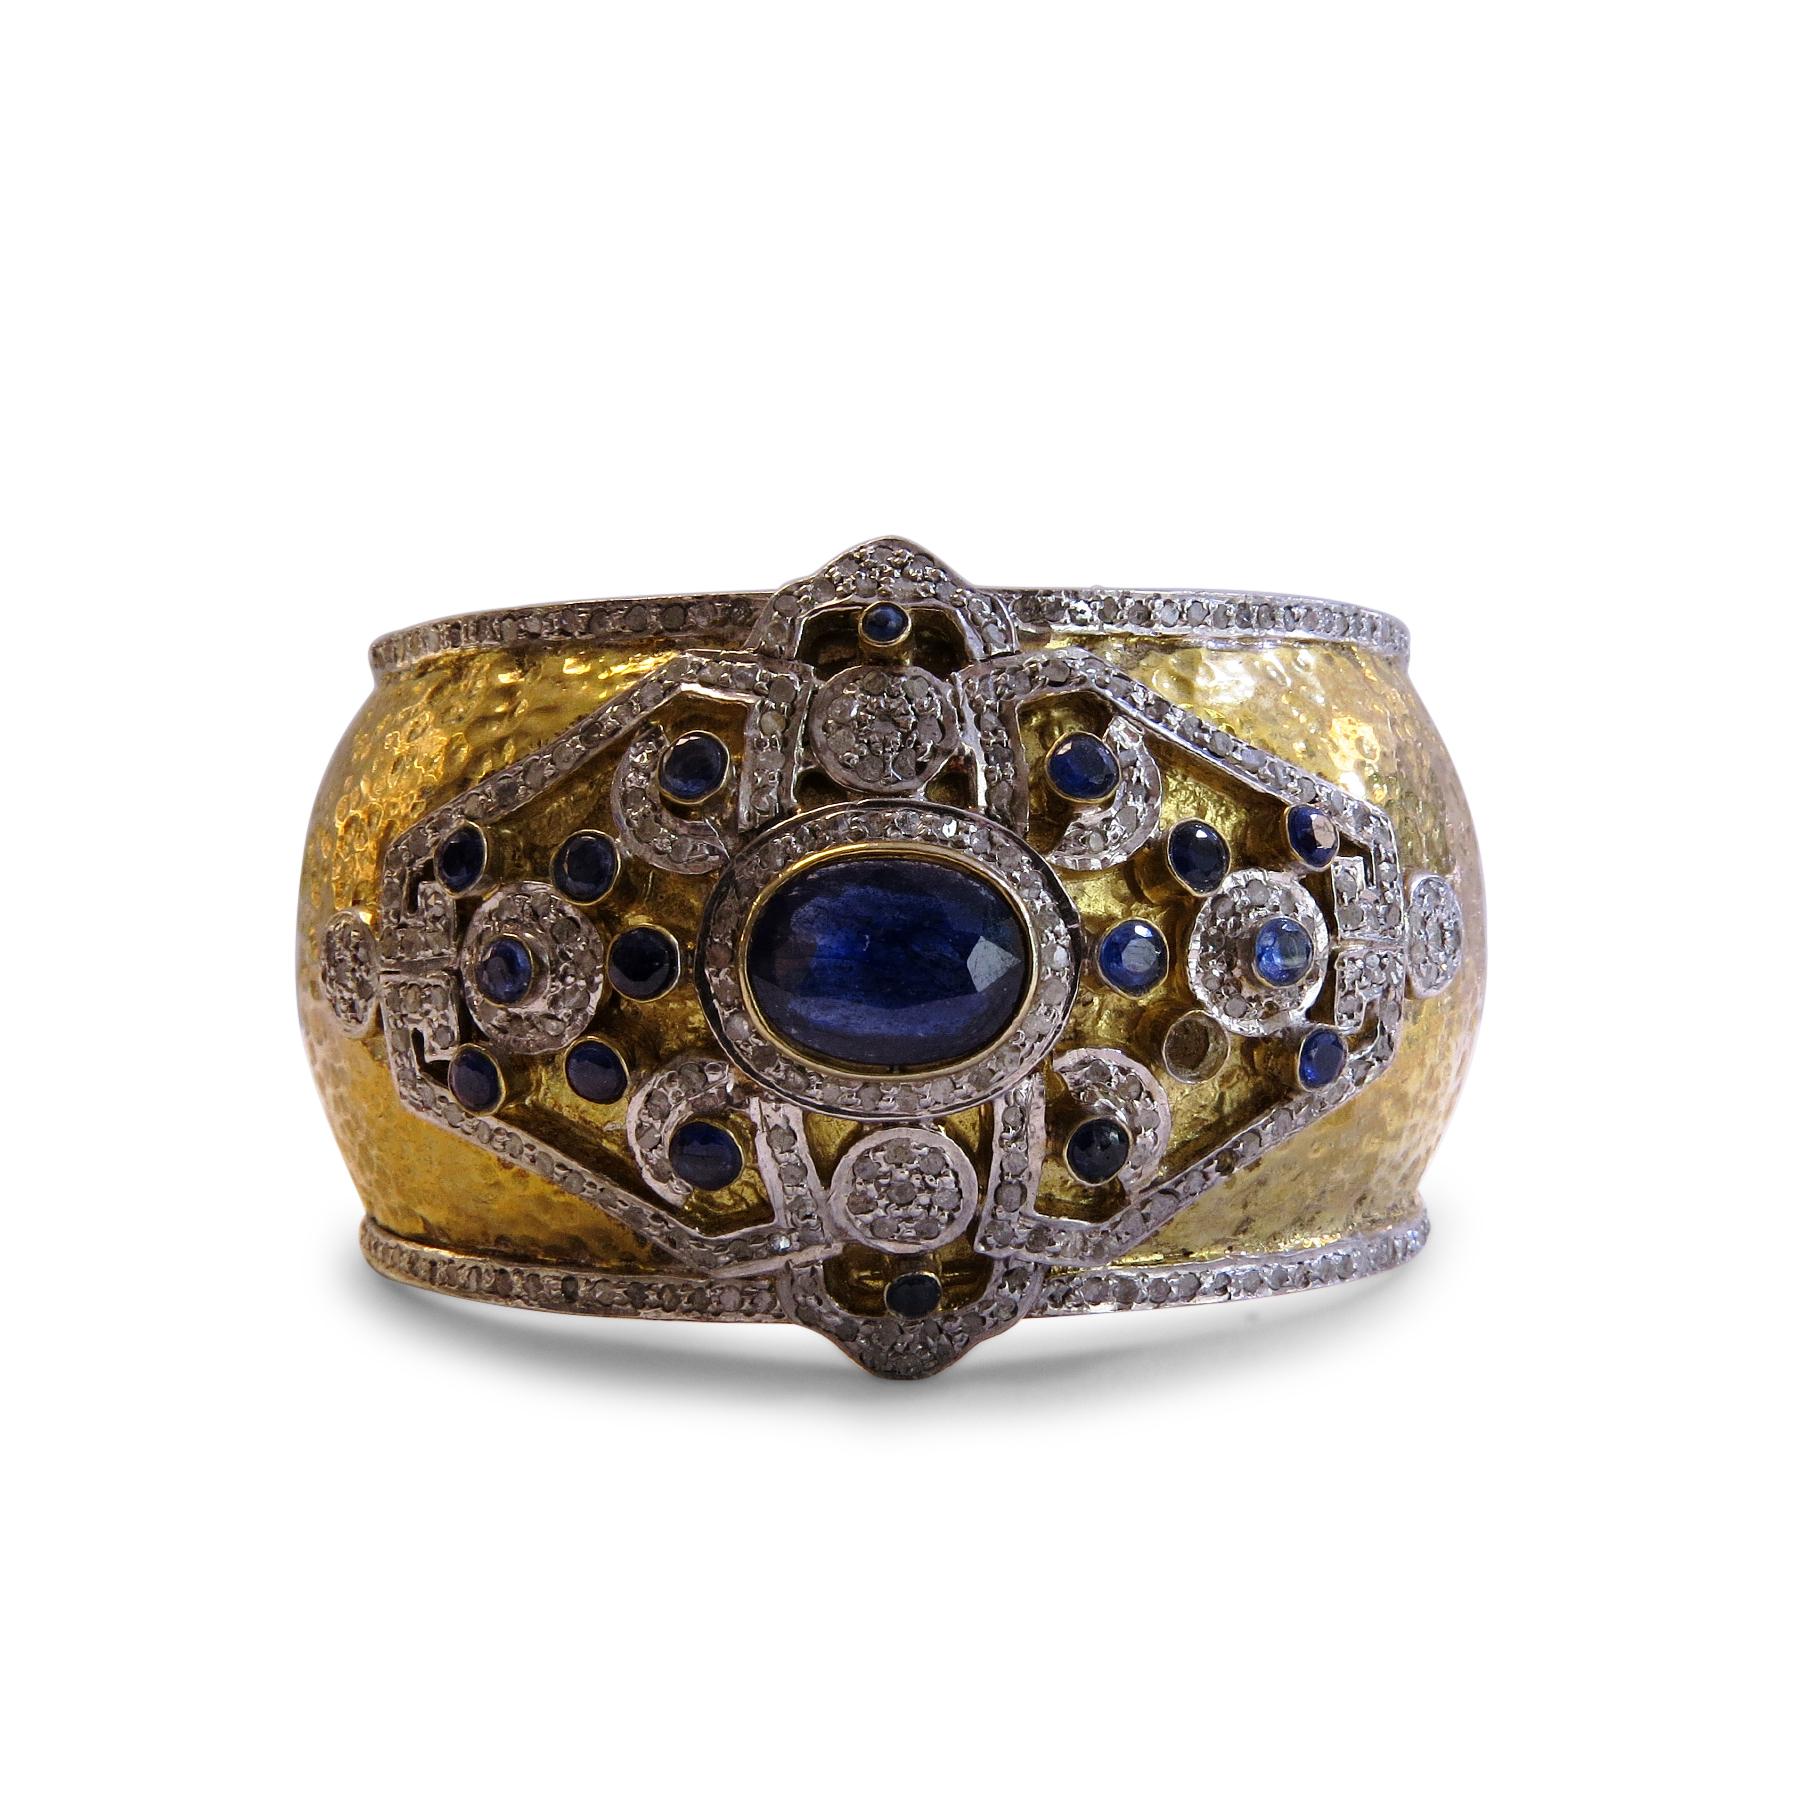 Sapphire= About 4ct total
Diamond= About 1.5 ct total
Weight= 59gr 
18k Gold plated on St. Silver